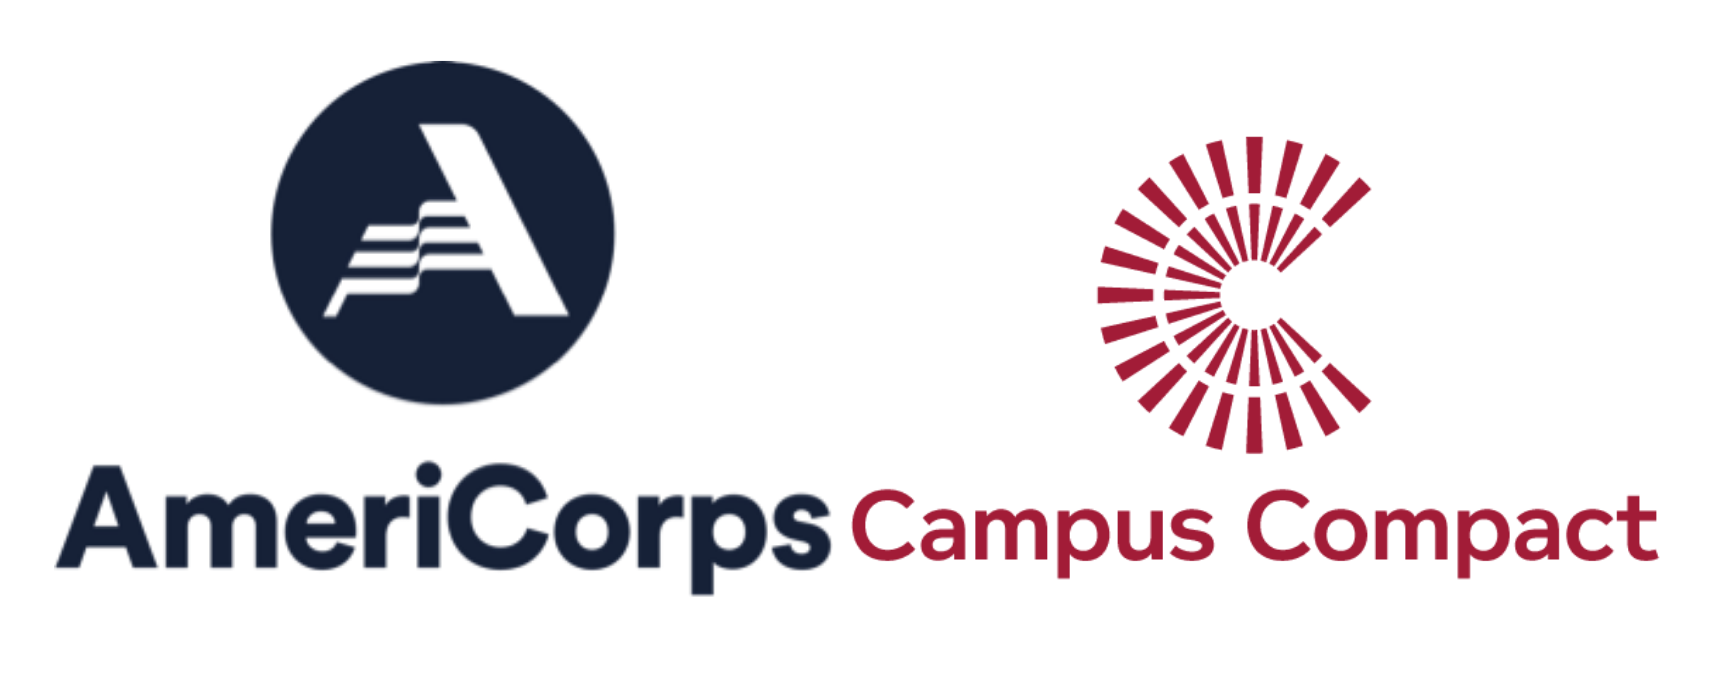 AmeriCorps & Campus Compact logos